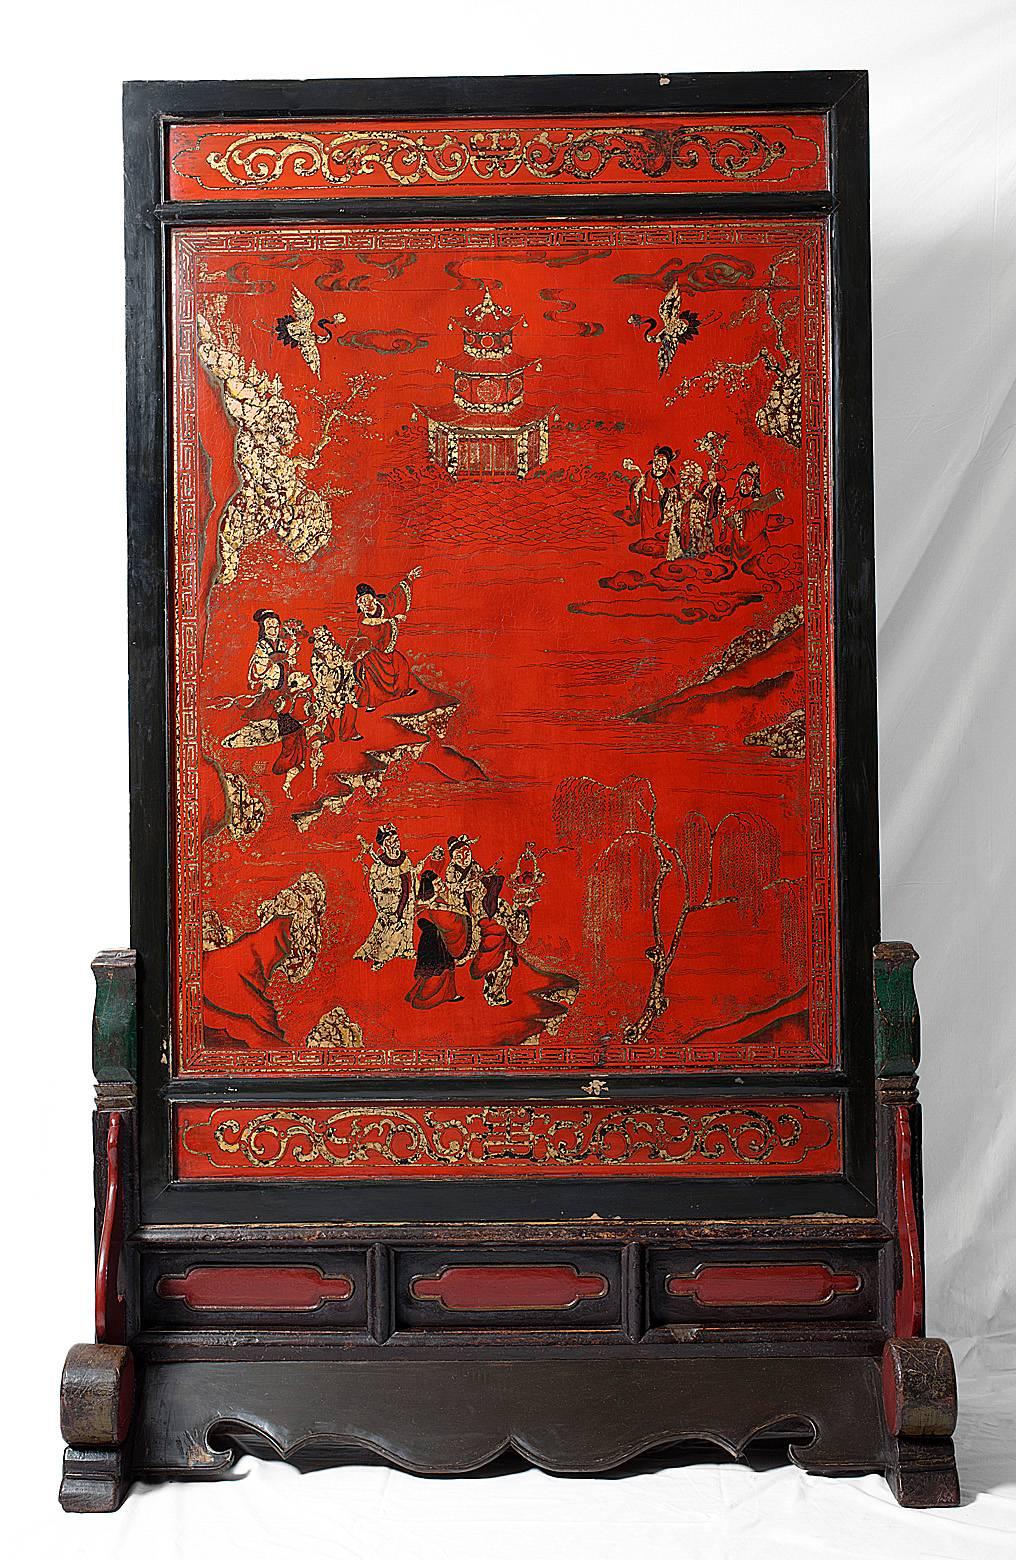 This monumental Chinese screen comes from an important Shanxi Province Estate. 

Originally, this screen would have been placed opposite the entrance to the courtyard or main reception hall. According to Chinese folk belief, evil spirits could